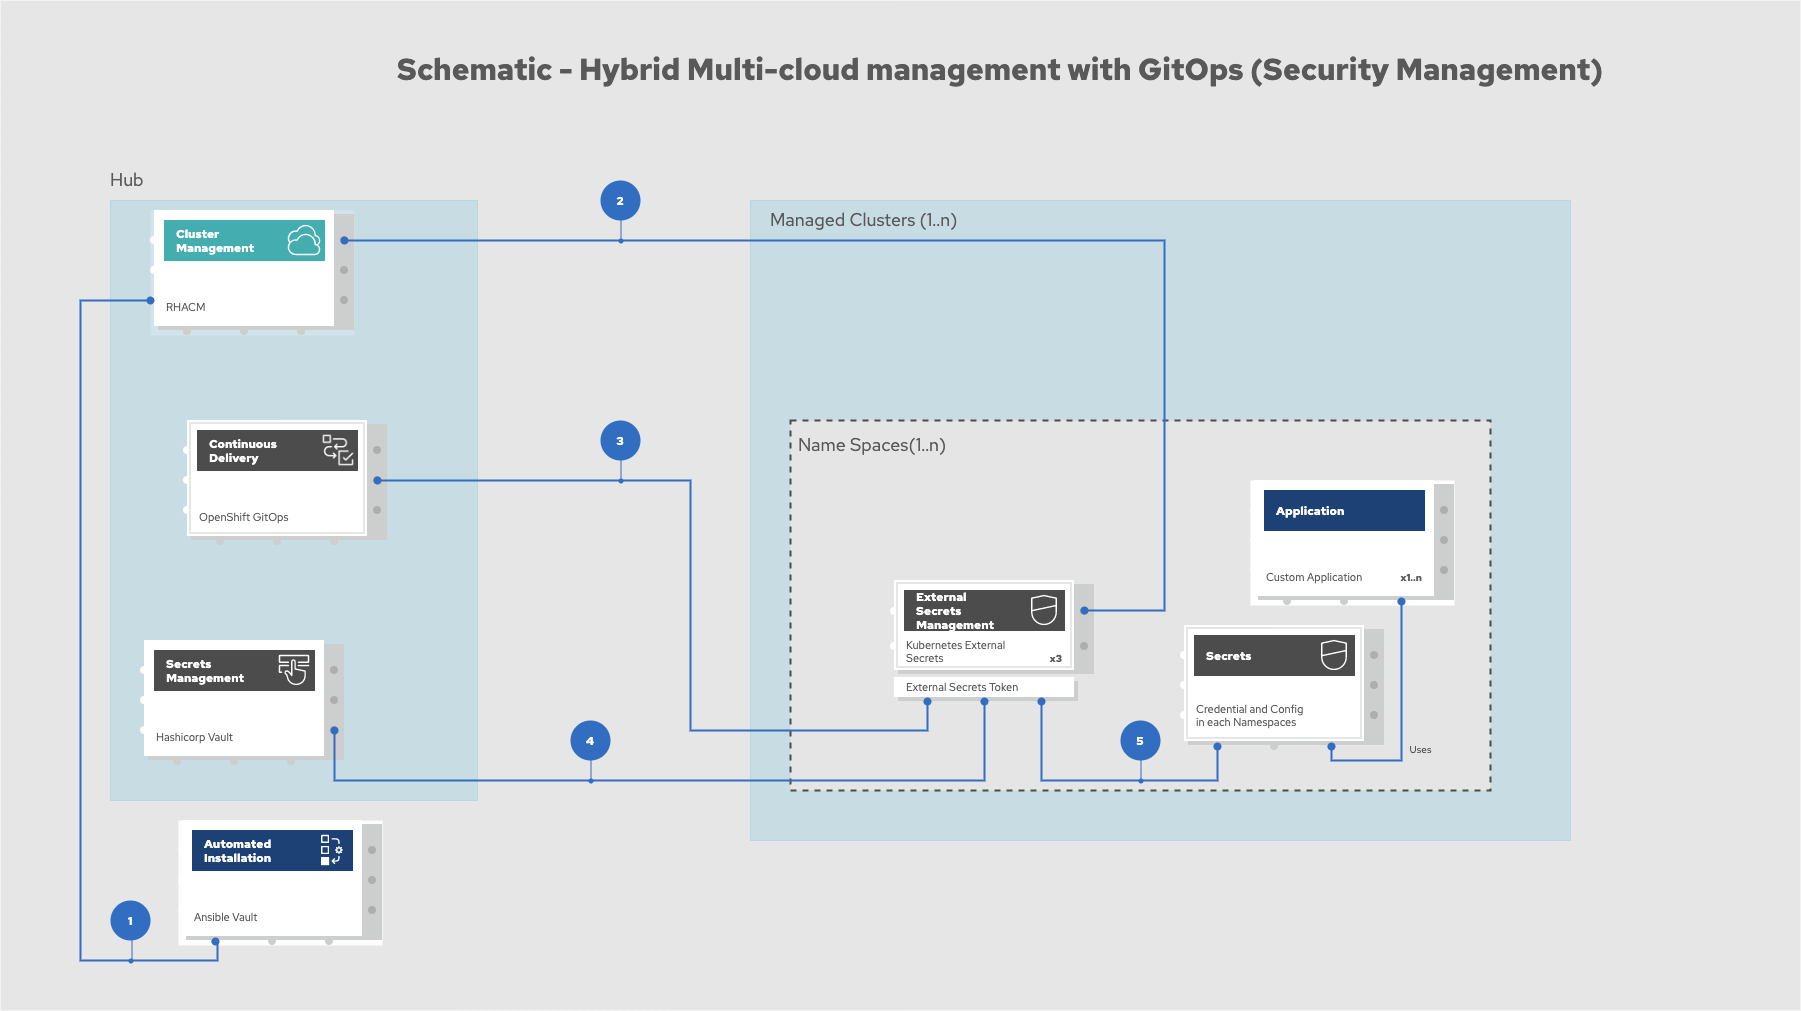 Schematic showing the setup and use of external secrets management